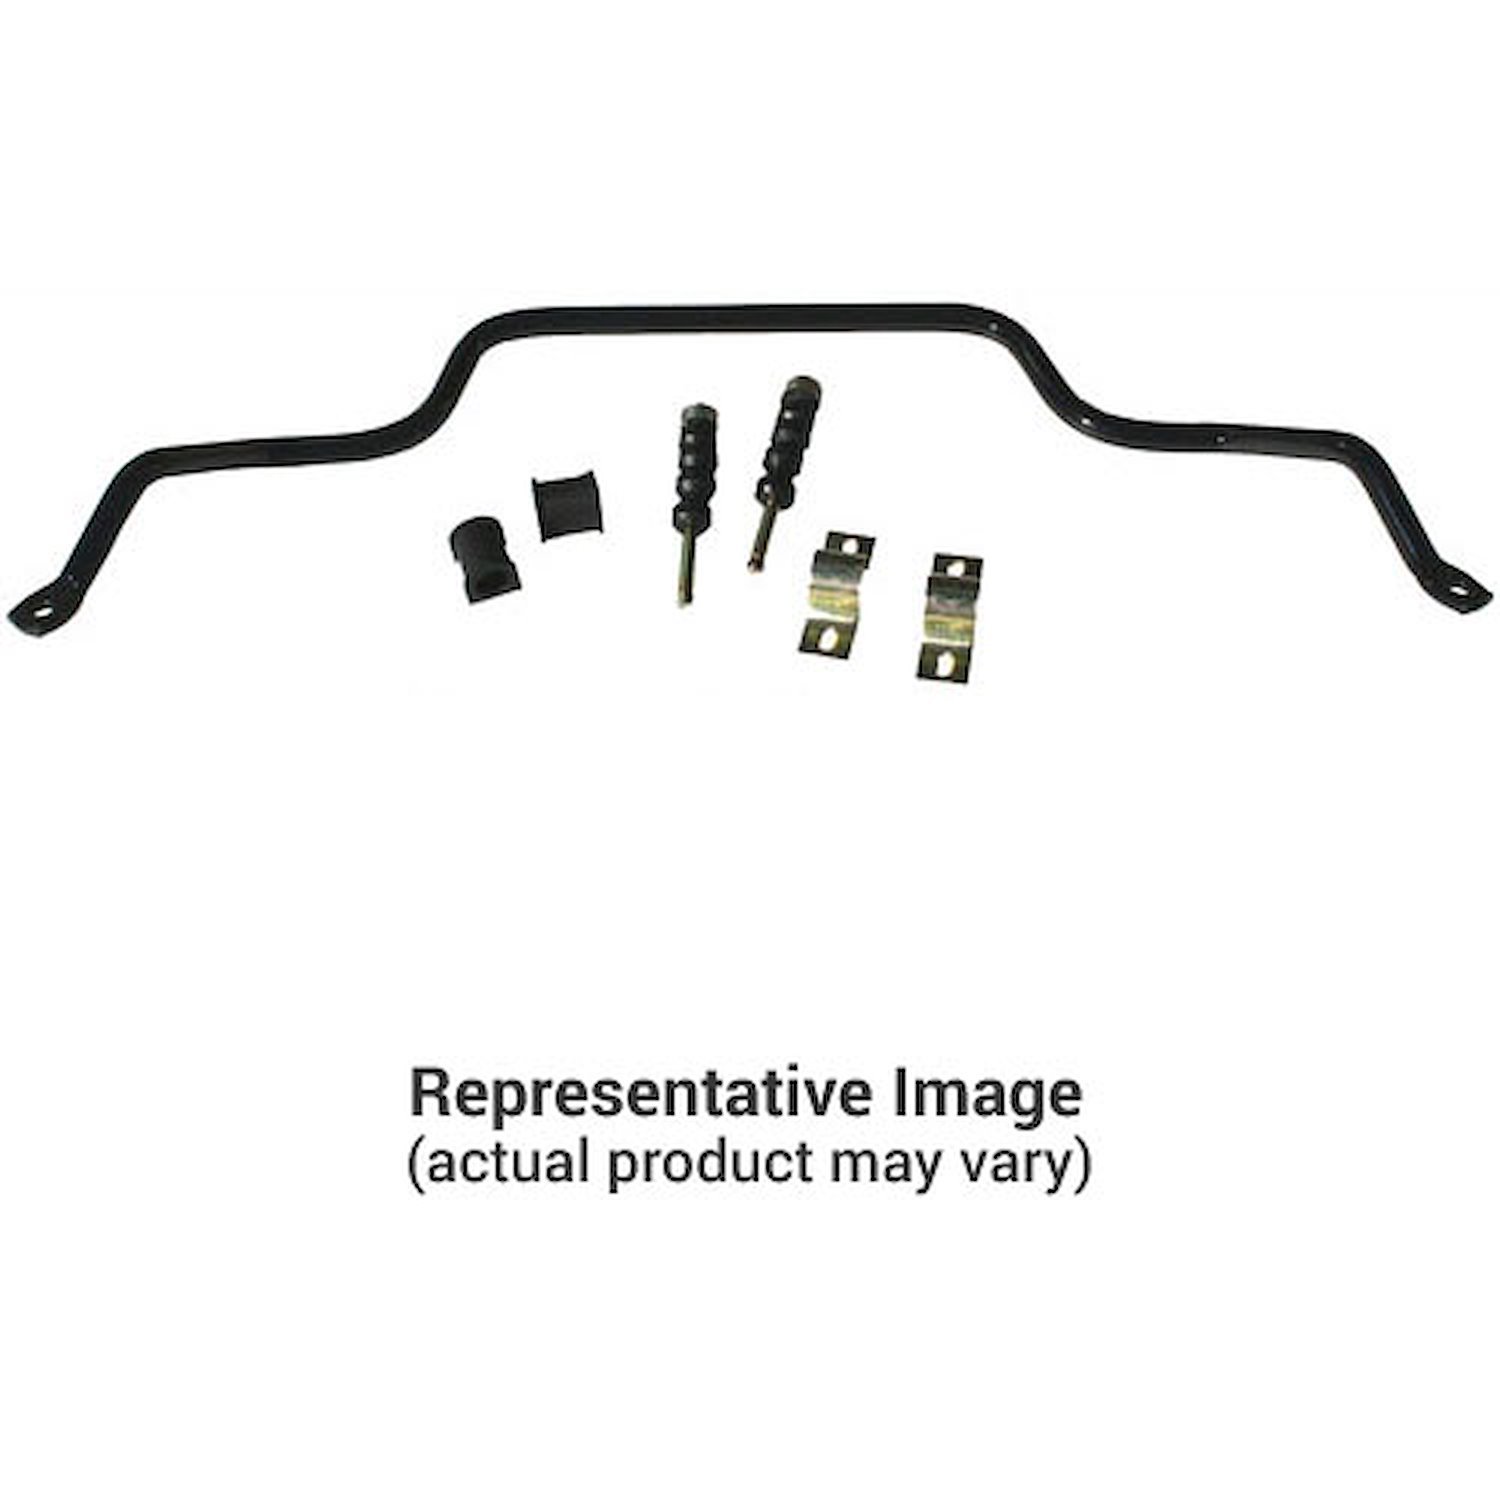 1" Rear Sway Bar 1973-91 Suburban and Yukon XL (4WD), 1500 (With Towing Package)